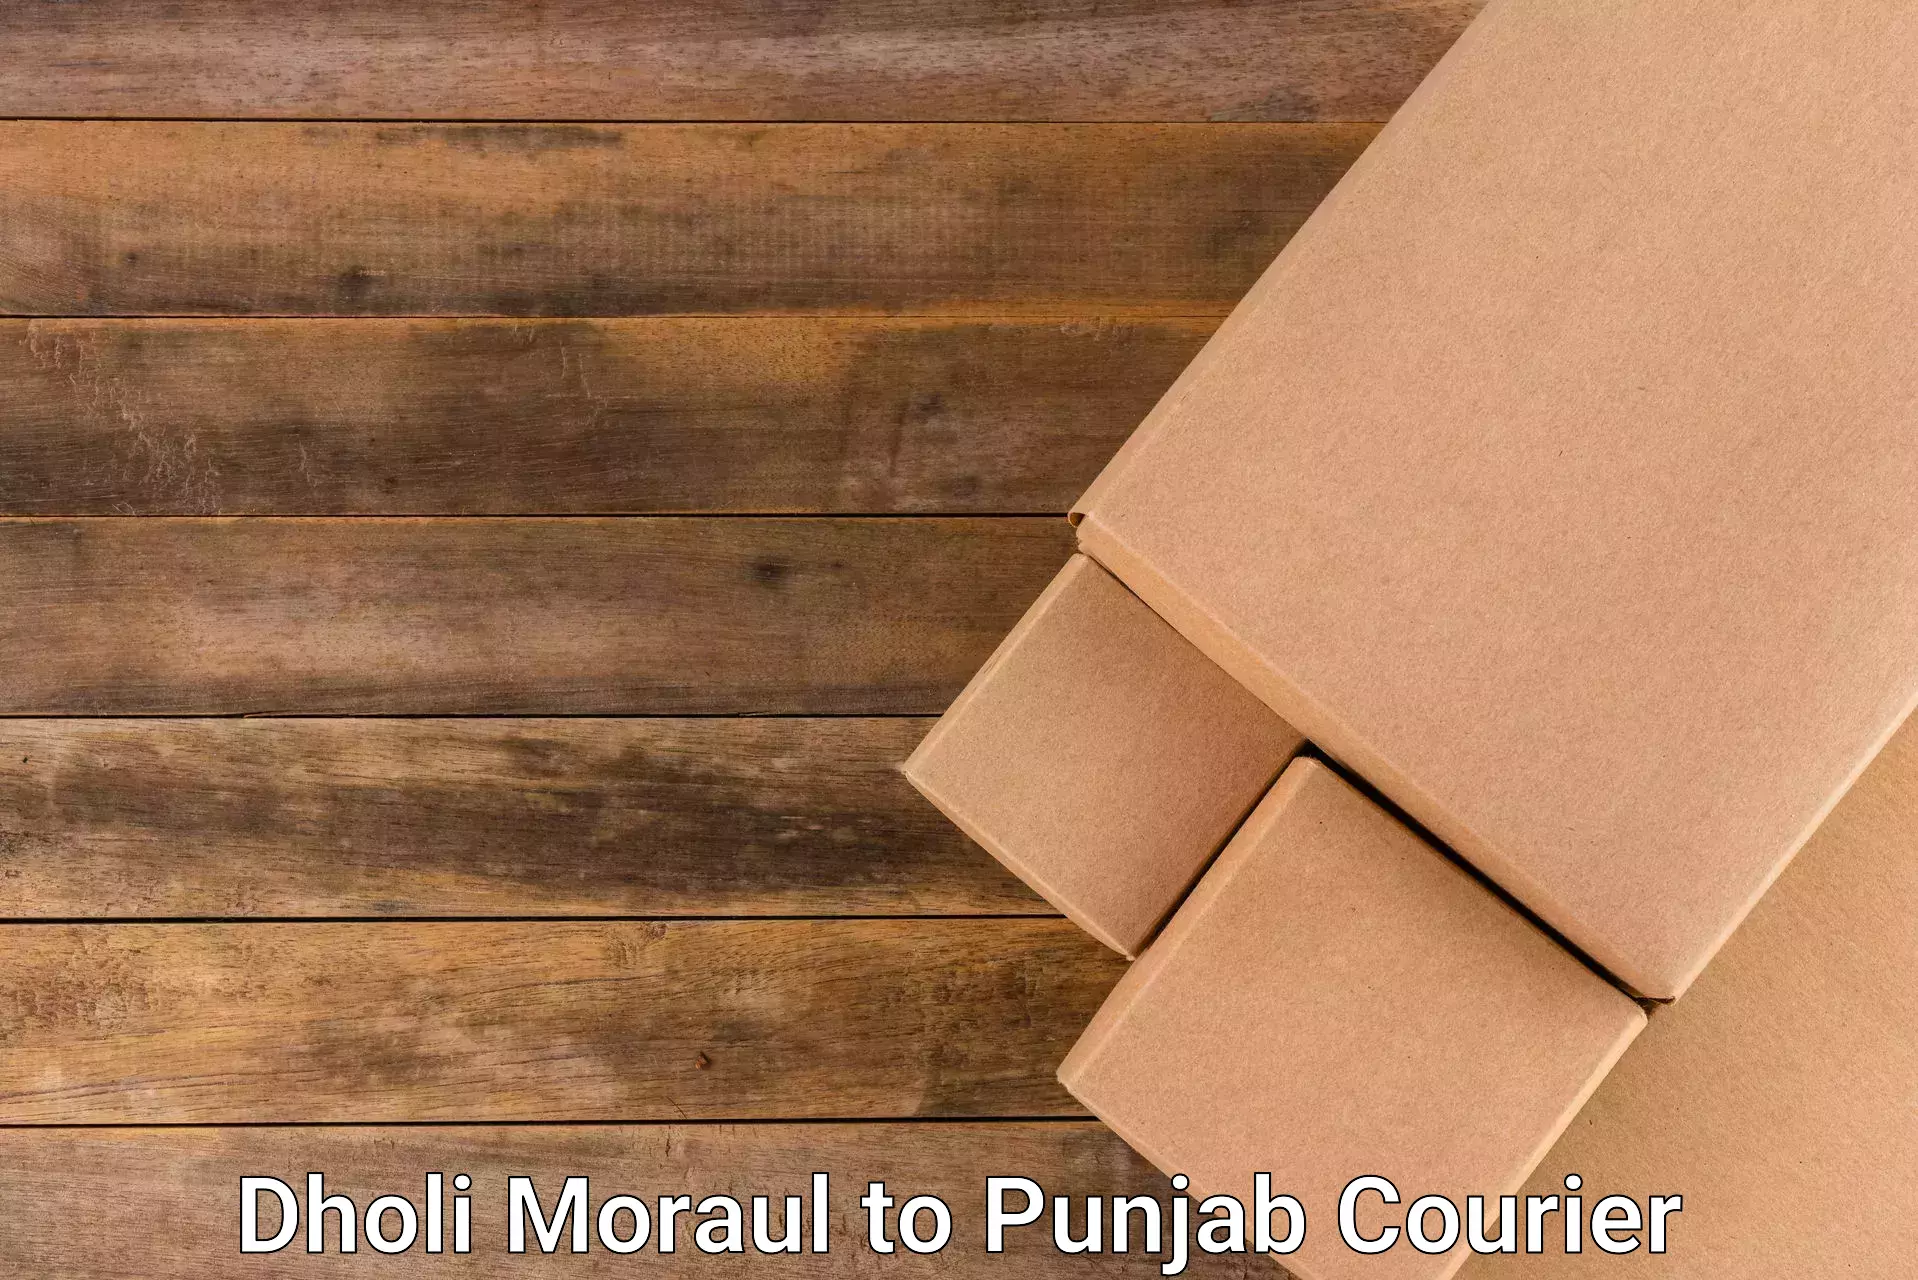 International courier networks Dholi Moraul to Malout